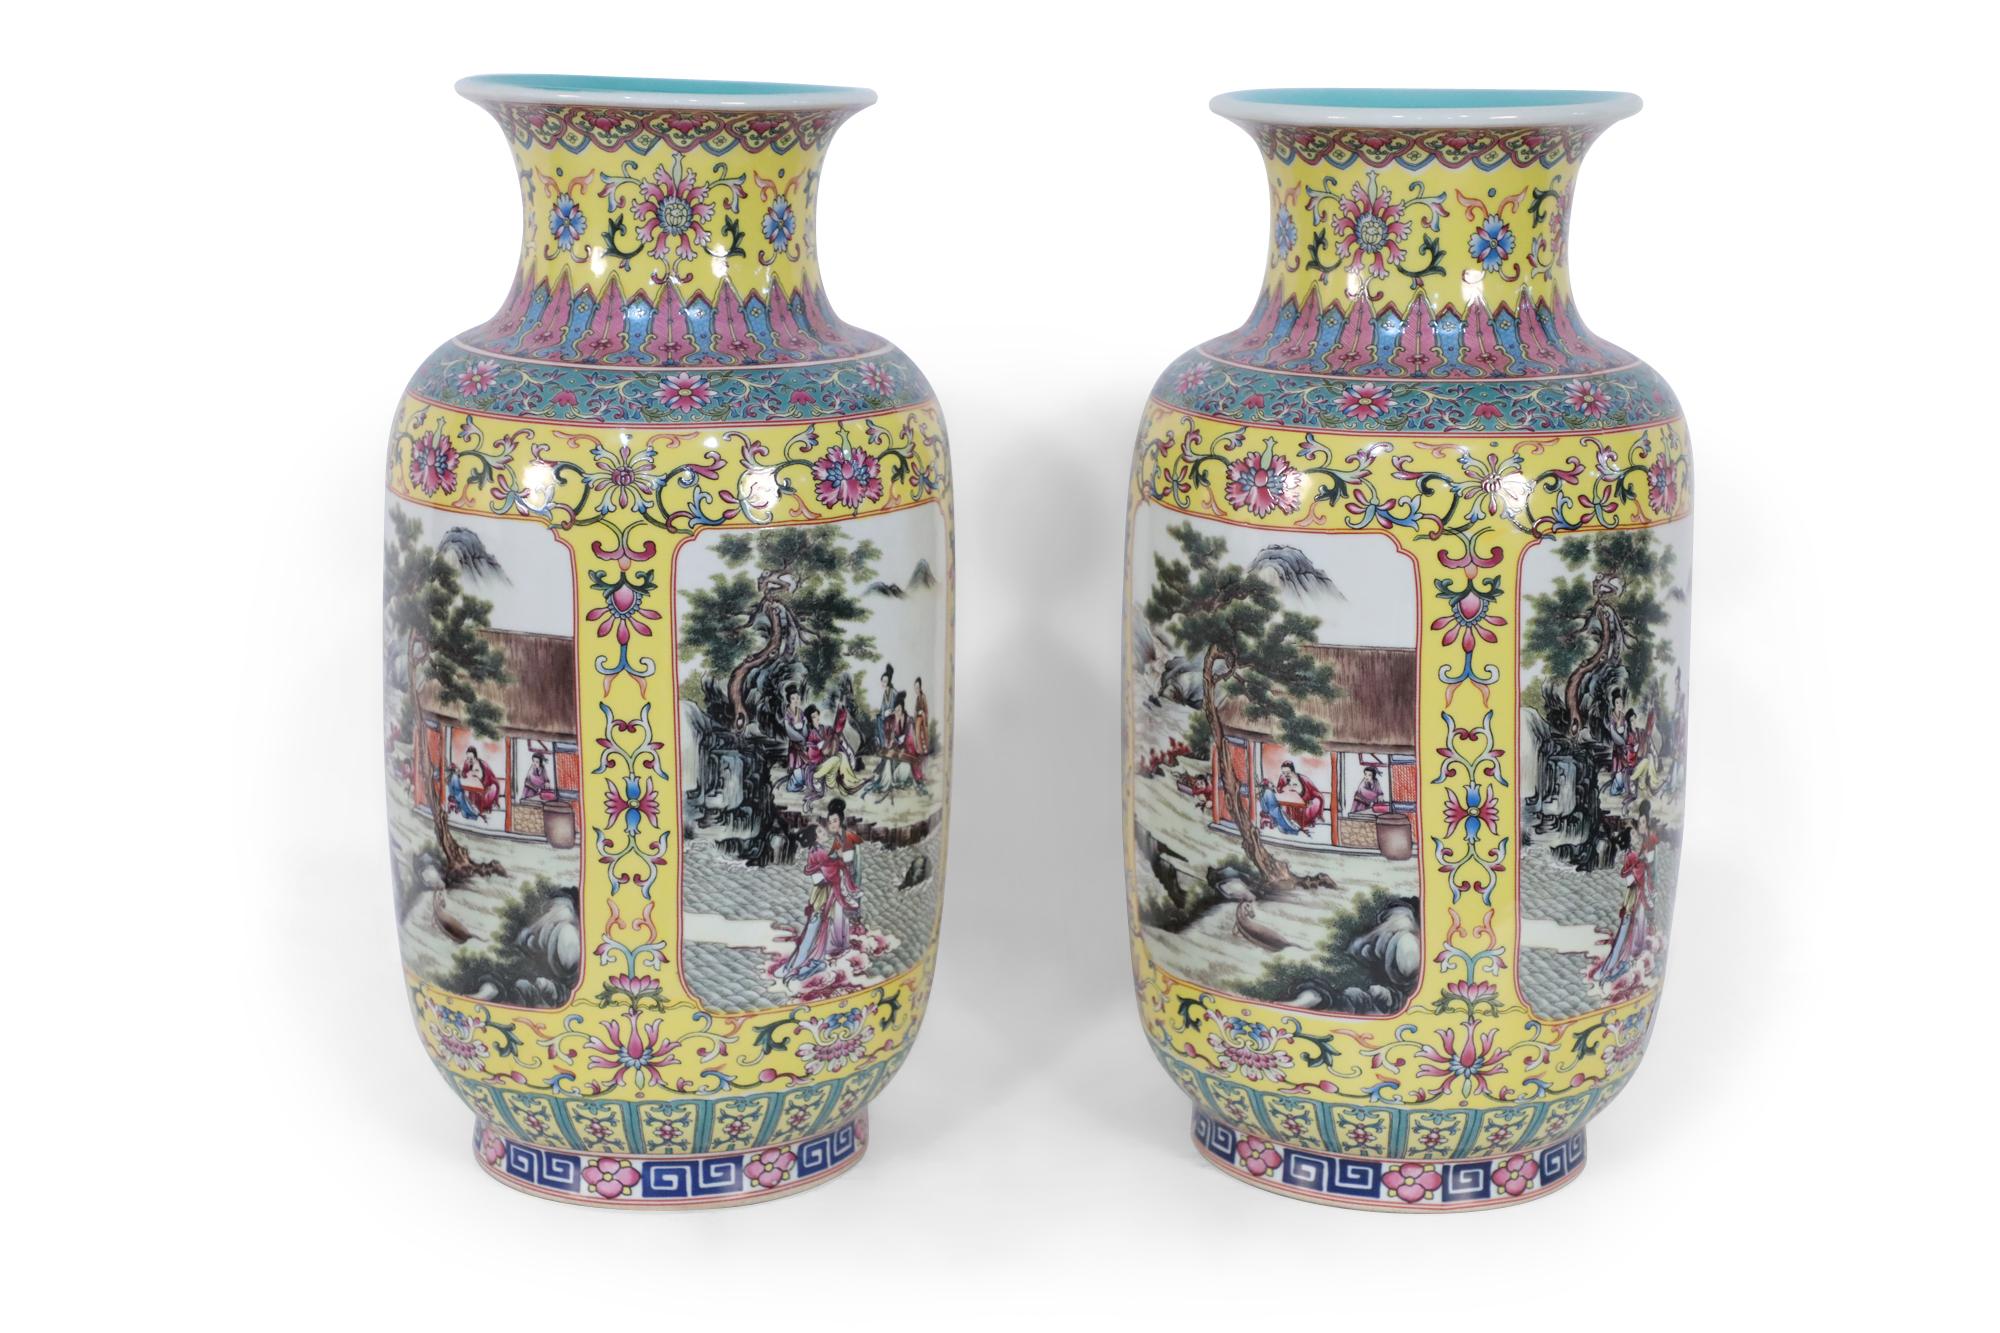 Pair of Chinese vases with turquoise interiors, and yellow and turquoise grounds decorated in purple and blue floral designs, framing central, richly depicted genre vignettes wrapping the entirety of the bodies (priced as pair).